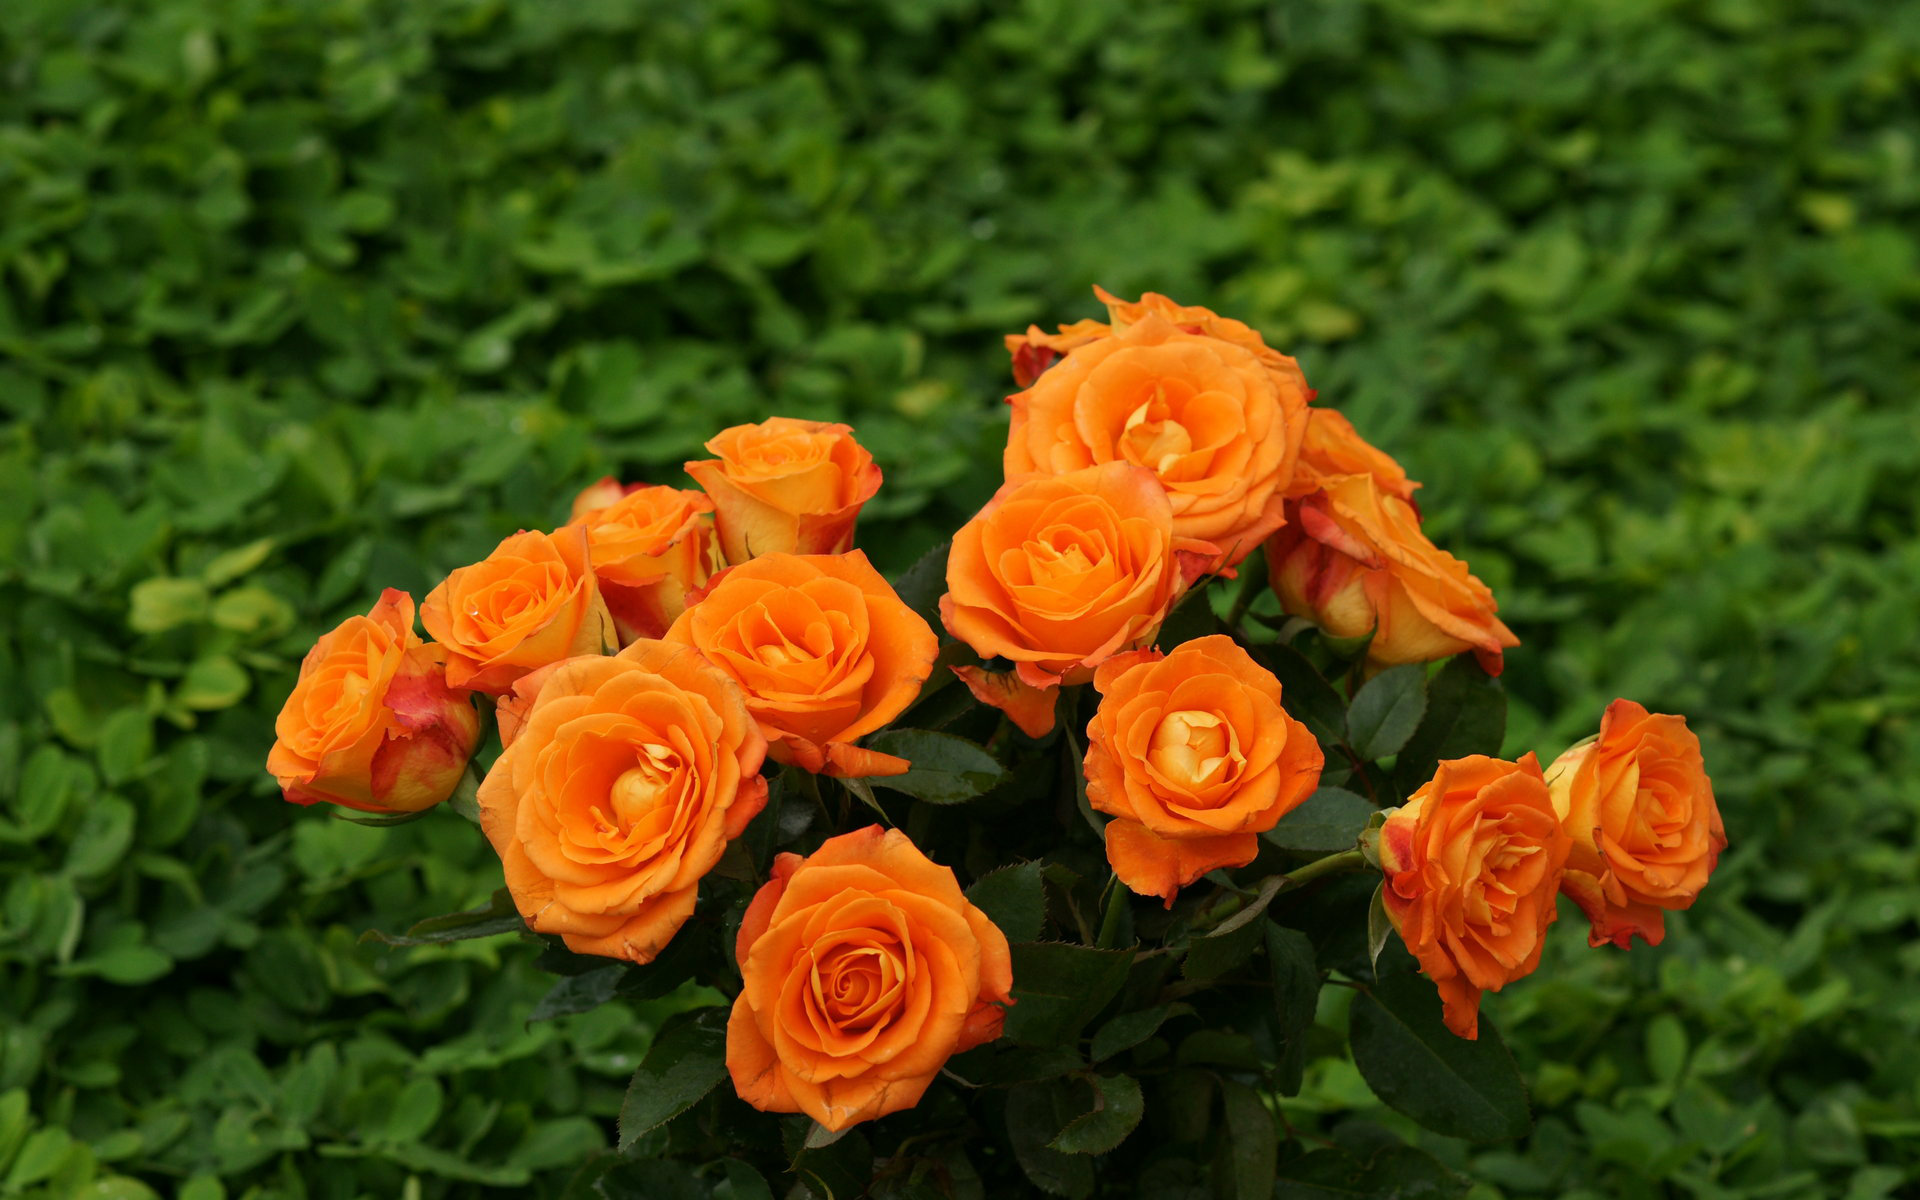 Orange Rose Wallpaper HD Pictures Flowers Most